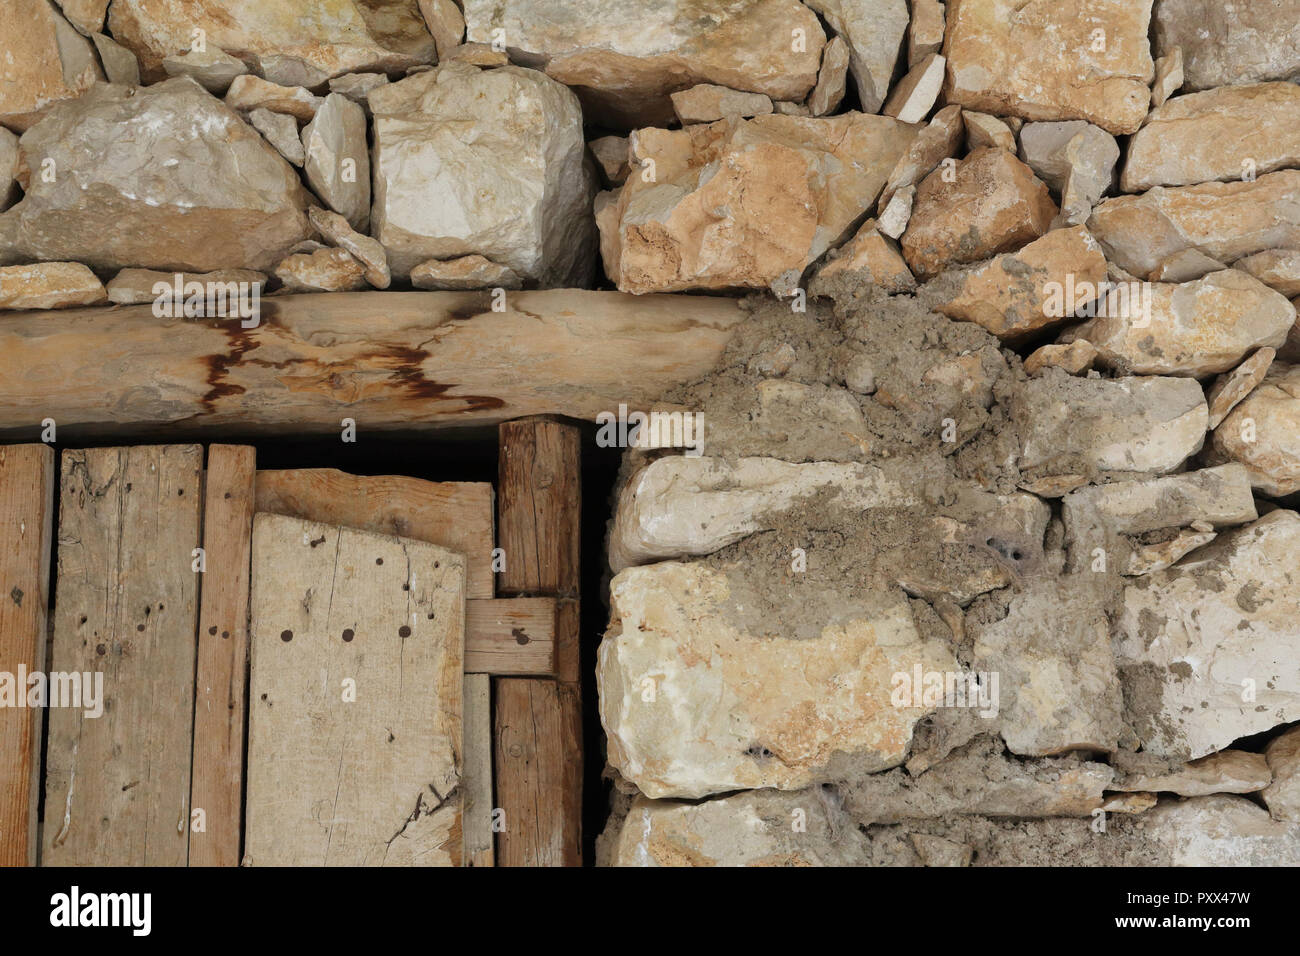 The detail of a wooden door and joint of a shelter for livestock made of stone drywall in the Barranco de la Hoz Seca canyon, Jaraba, Spain Stock Photo